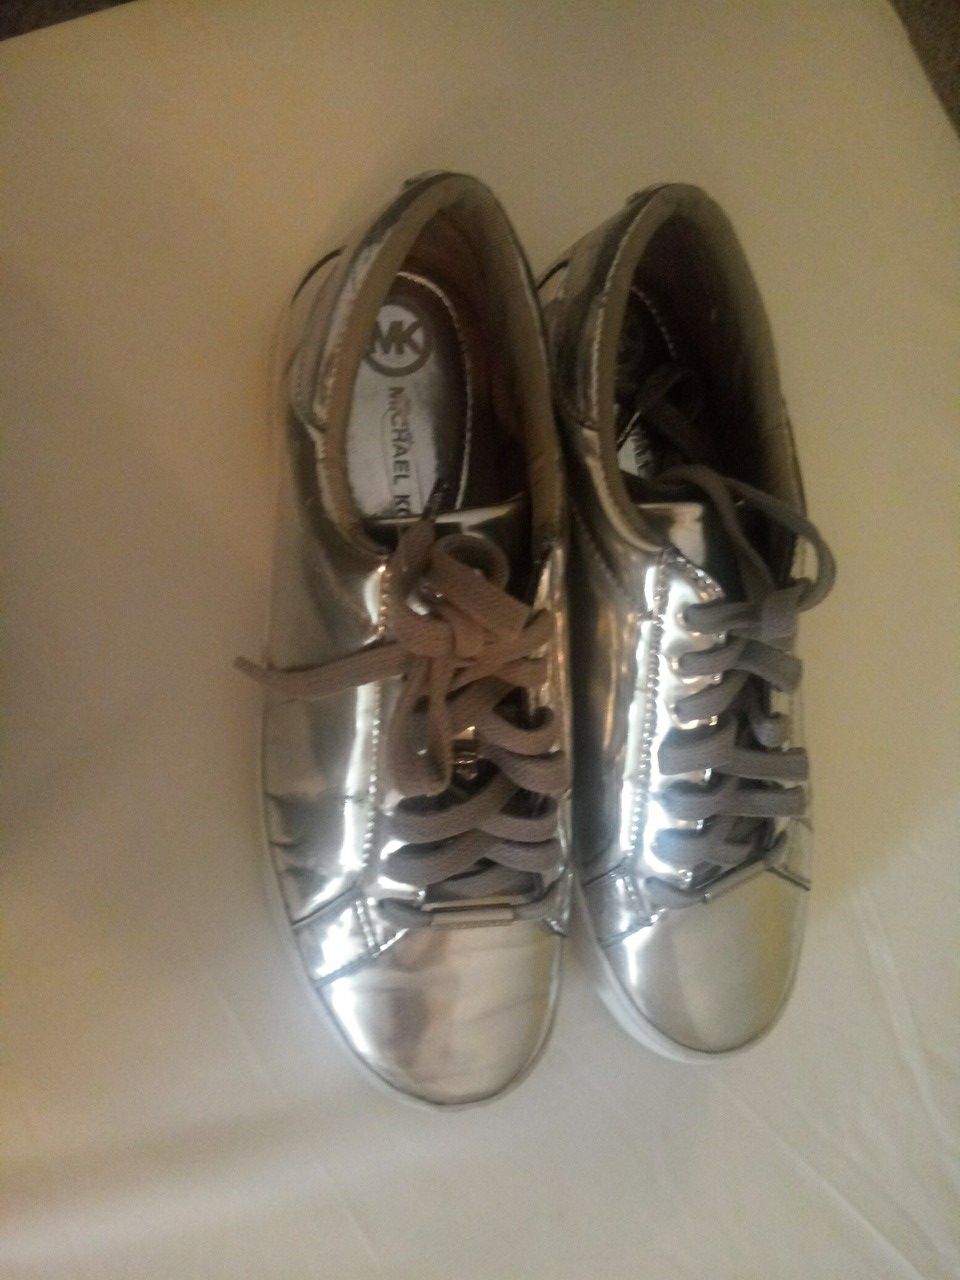 Authentic Michael Kors shoes size 7 in good condition